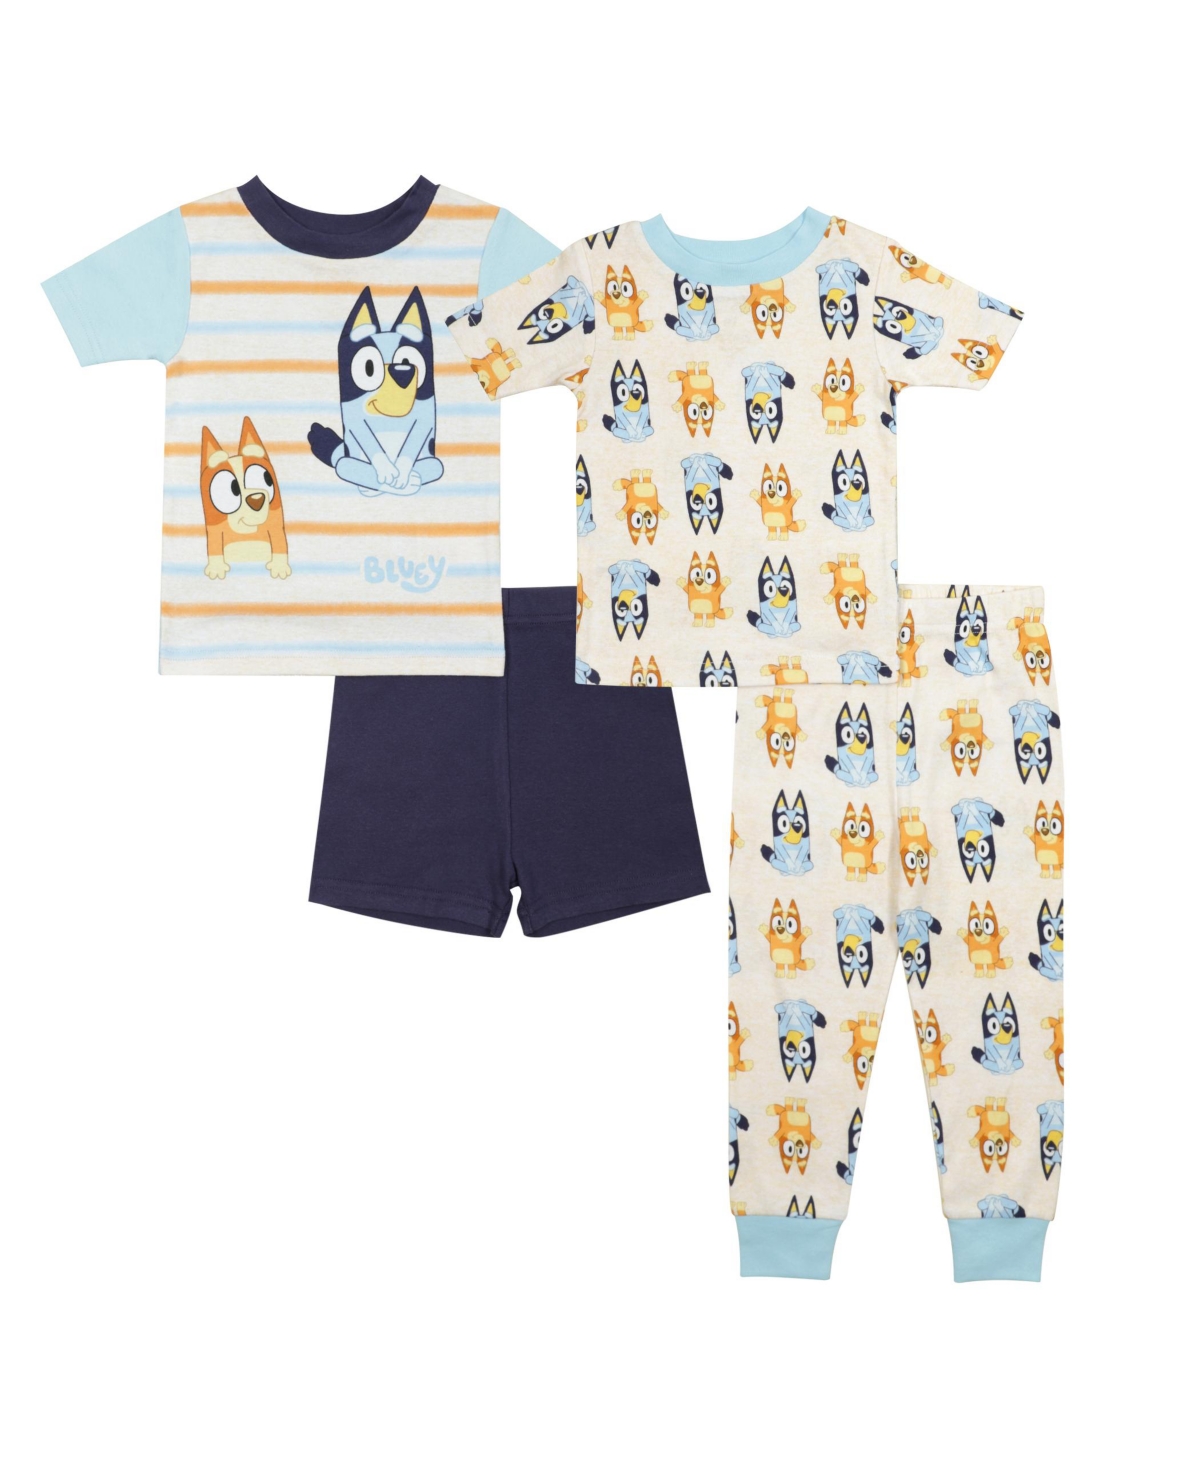 Ame Toddler Boys Bluey Short Sleeves Pajamas, 4 Piece Set In Assorted